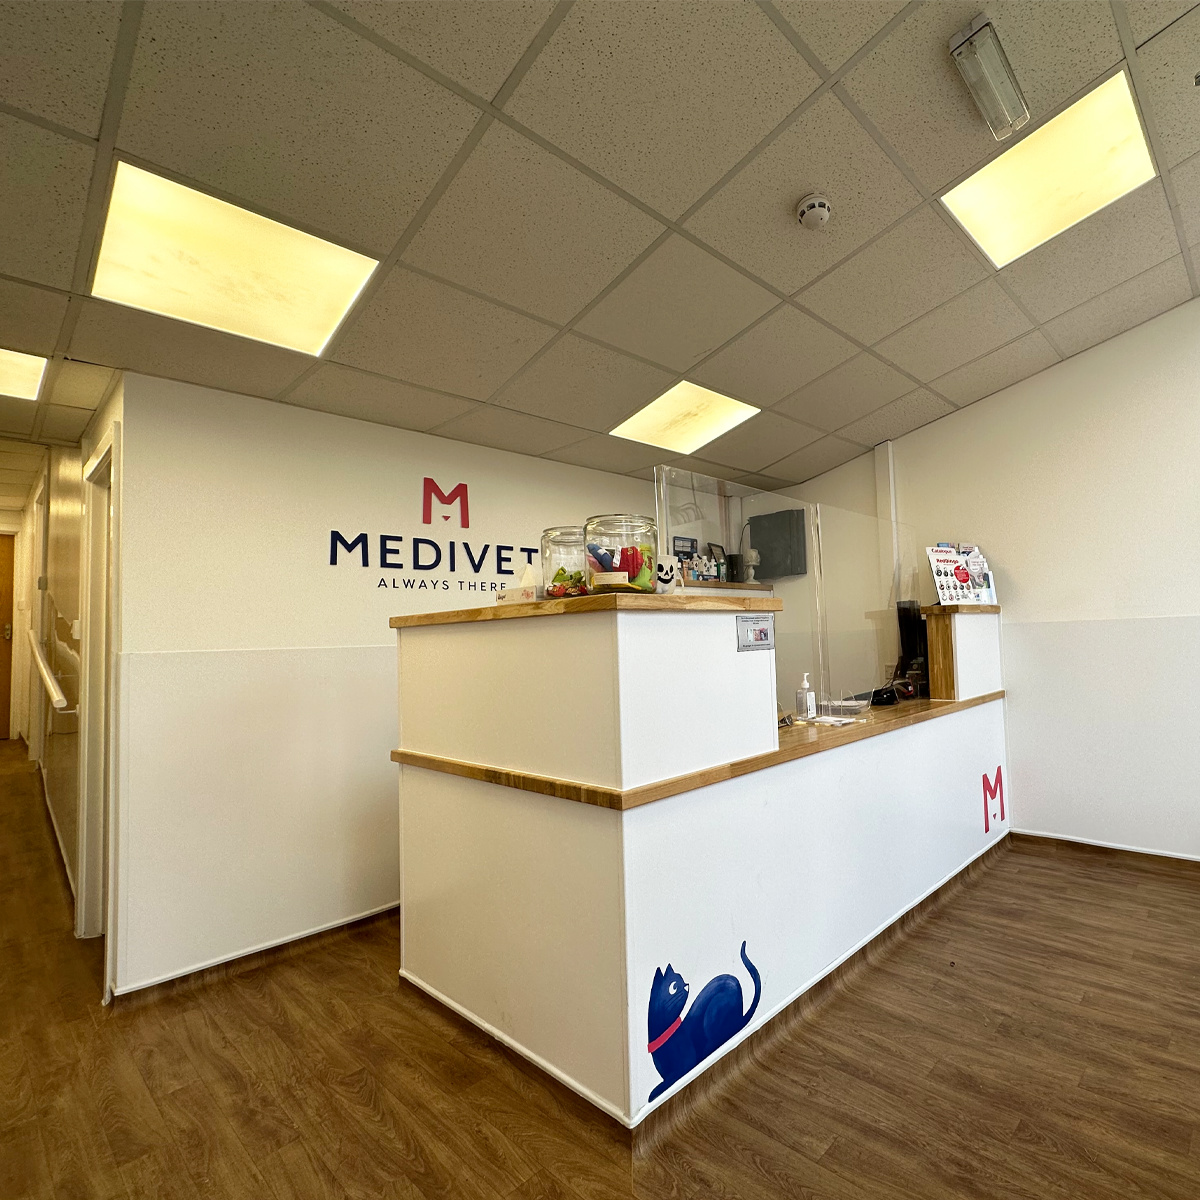 Reception area with Medivet logo on internal wall and branded graphics applied to desk